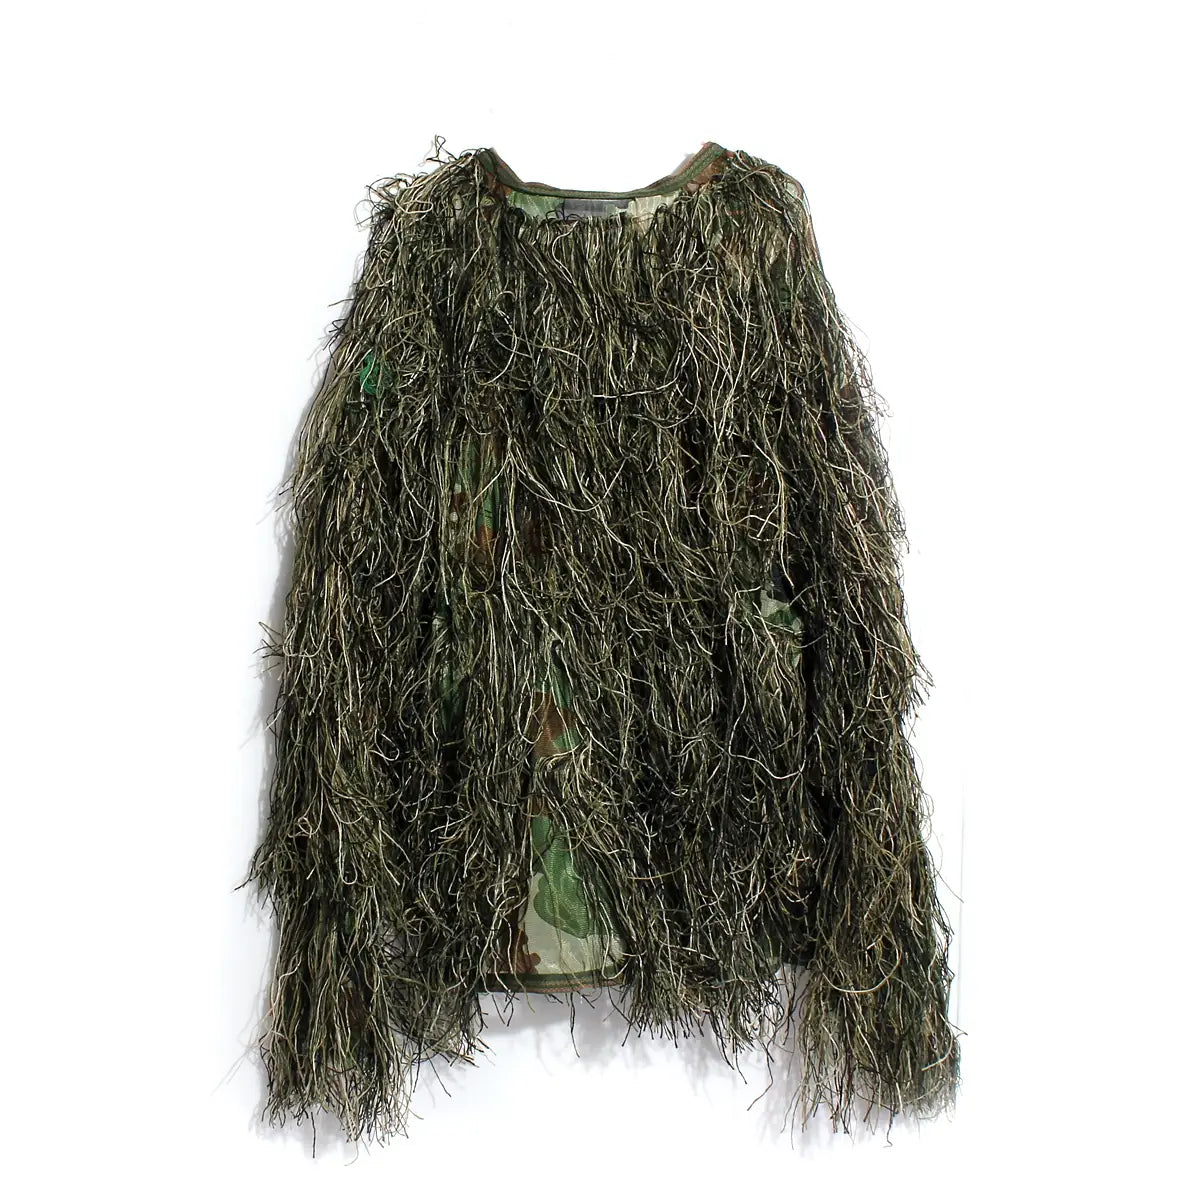 Ghillie Suit Camo 3d Woodland Camouflage Forest Hunting Hide